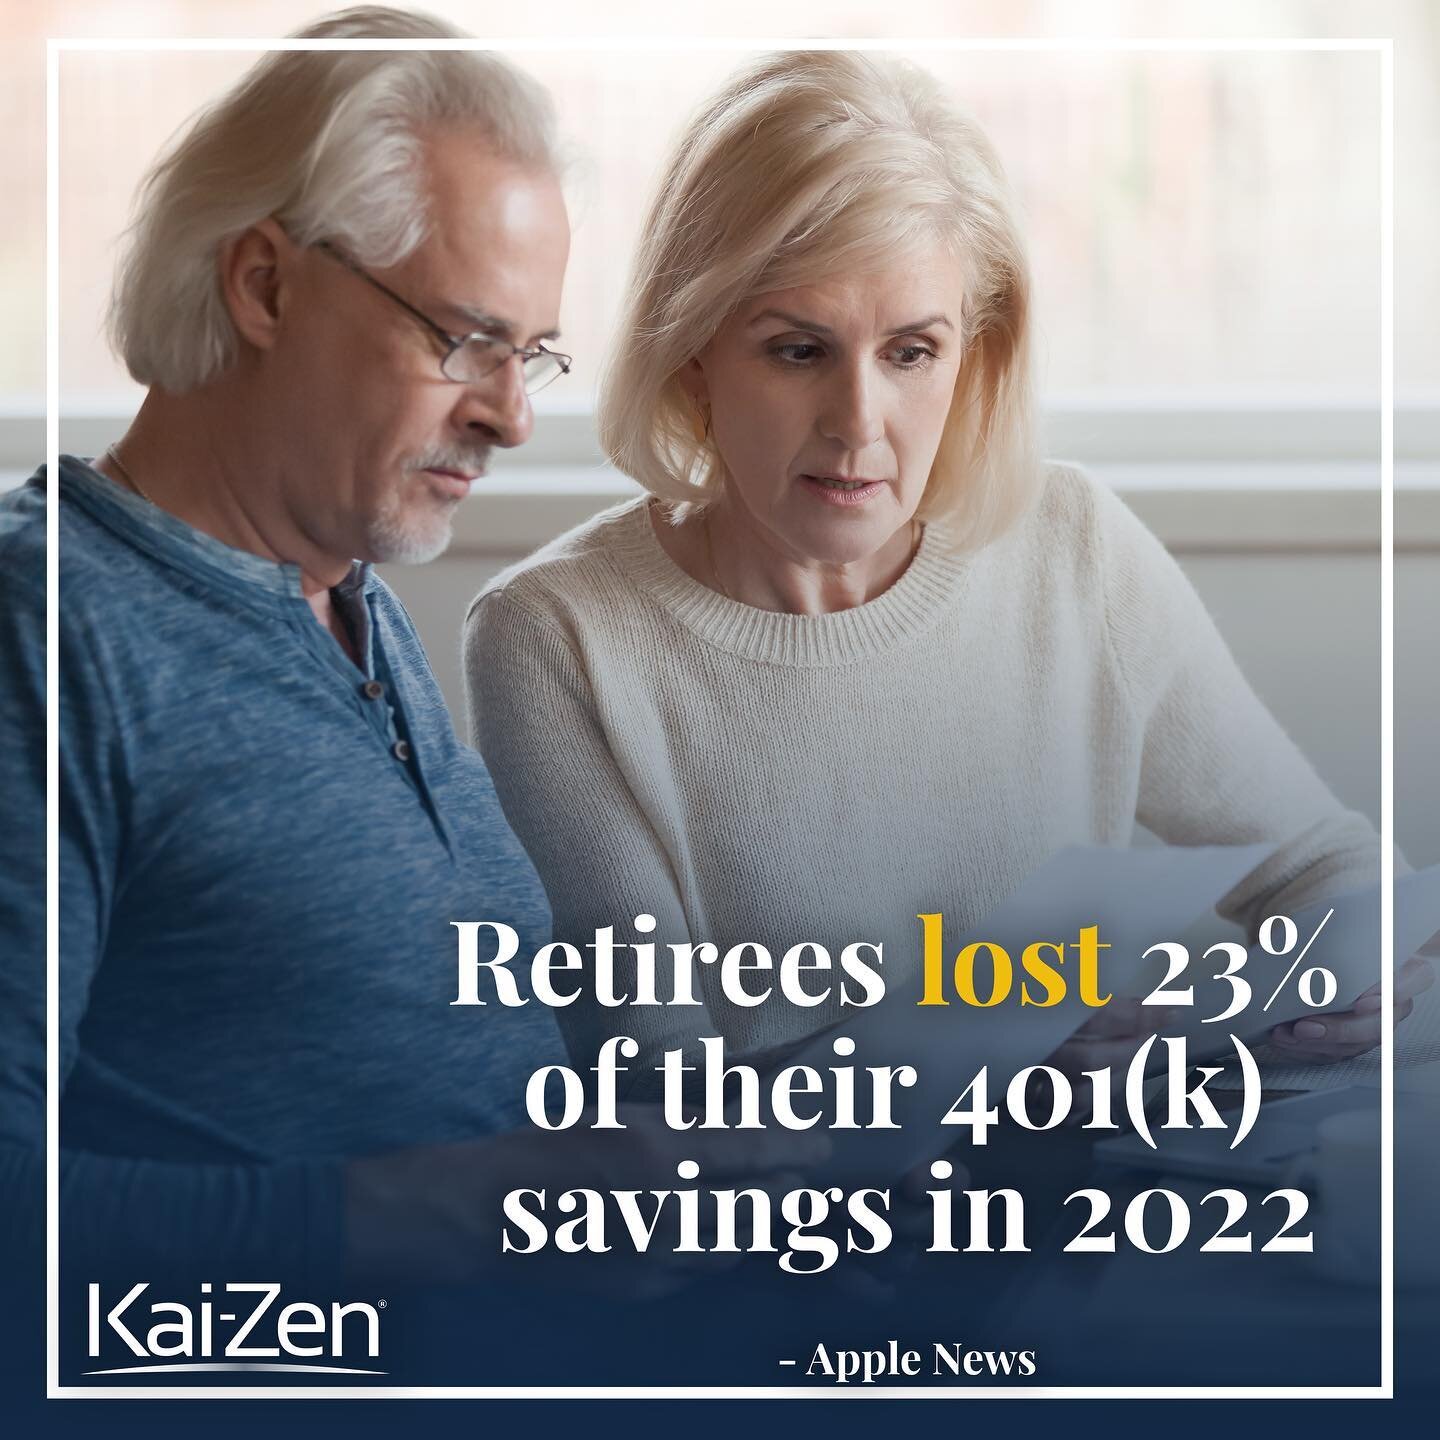 &quot;Retirees lost 23% of their 401k savings in 2022.&quot;

- Apple News

But with Kai-Zen, there's hope for recouping your losses. Our investment strategy has the potential to increase your returns by up to three times more. Don't let market downt